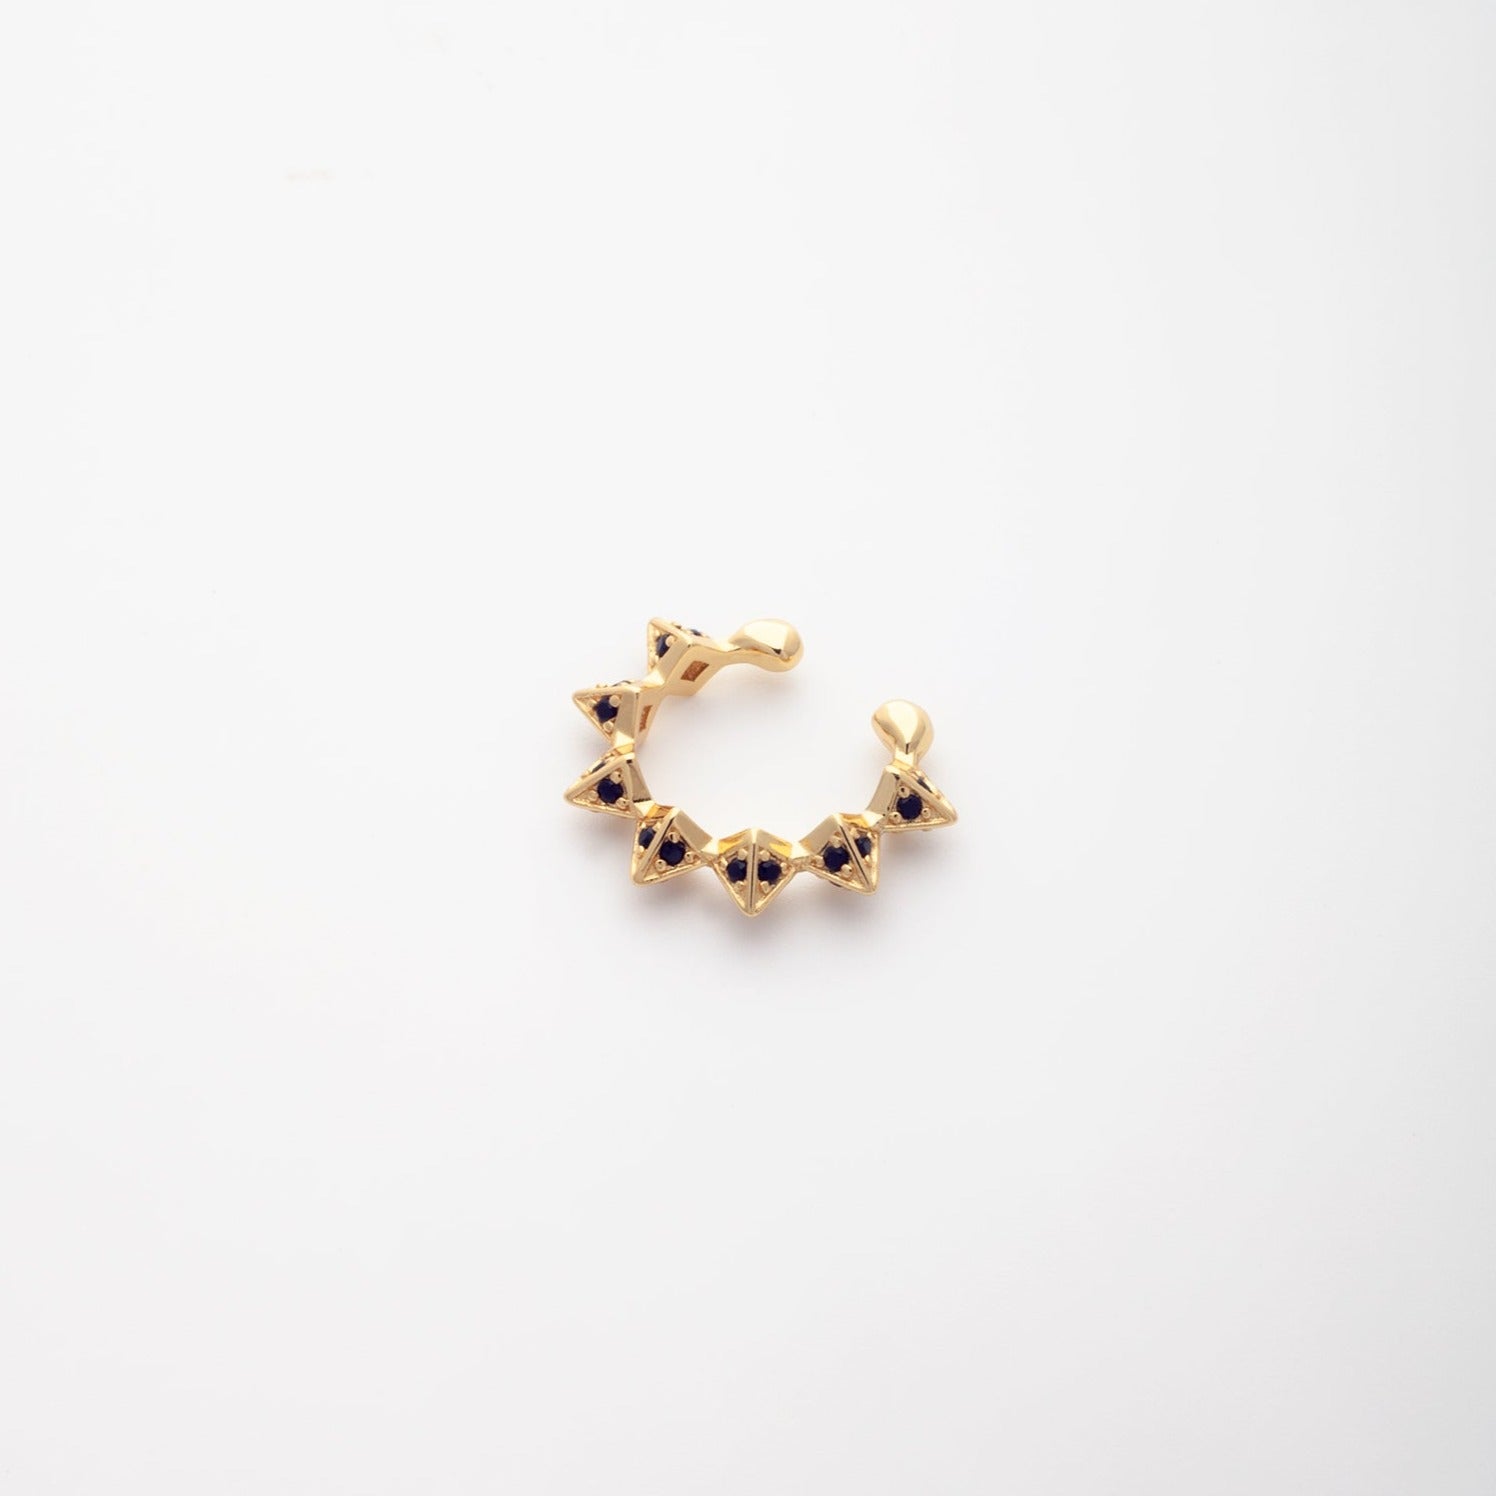 Spiked Ear Cuff in Black/Gold